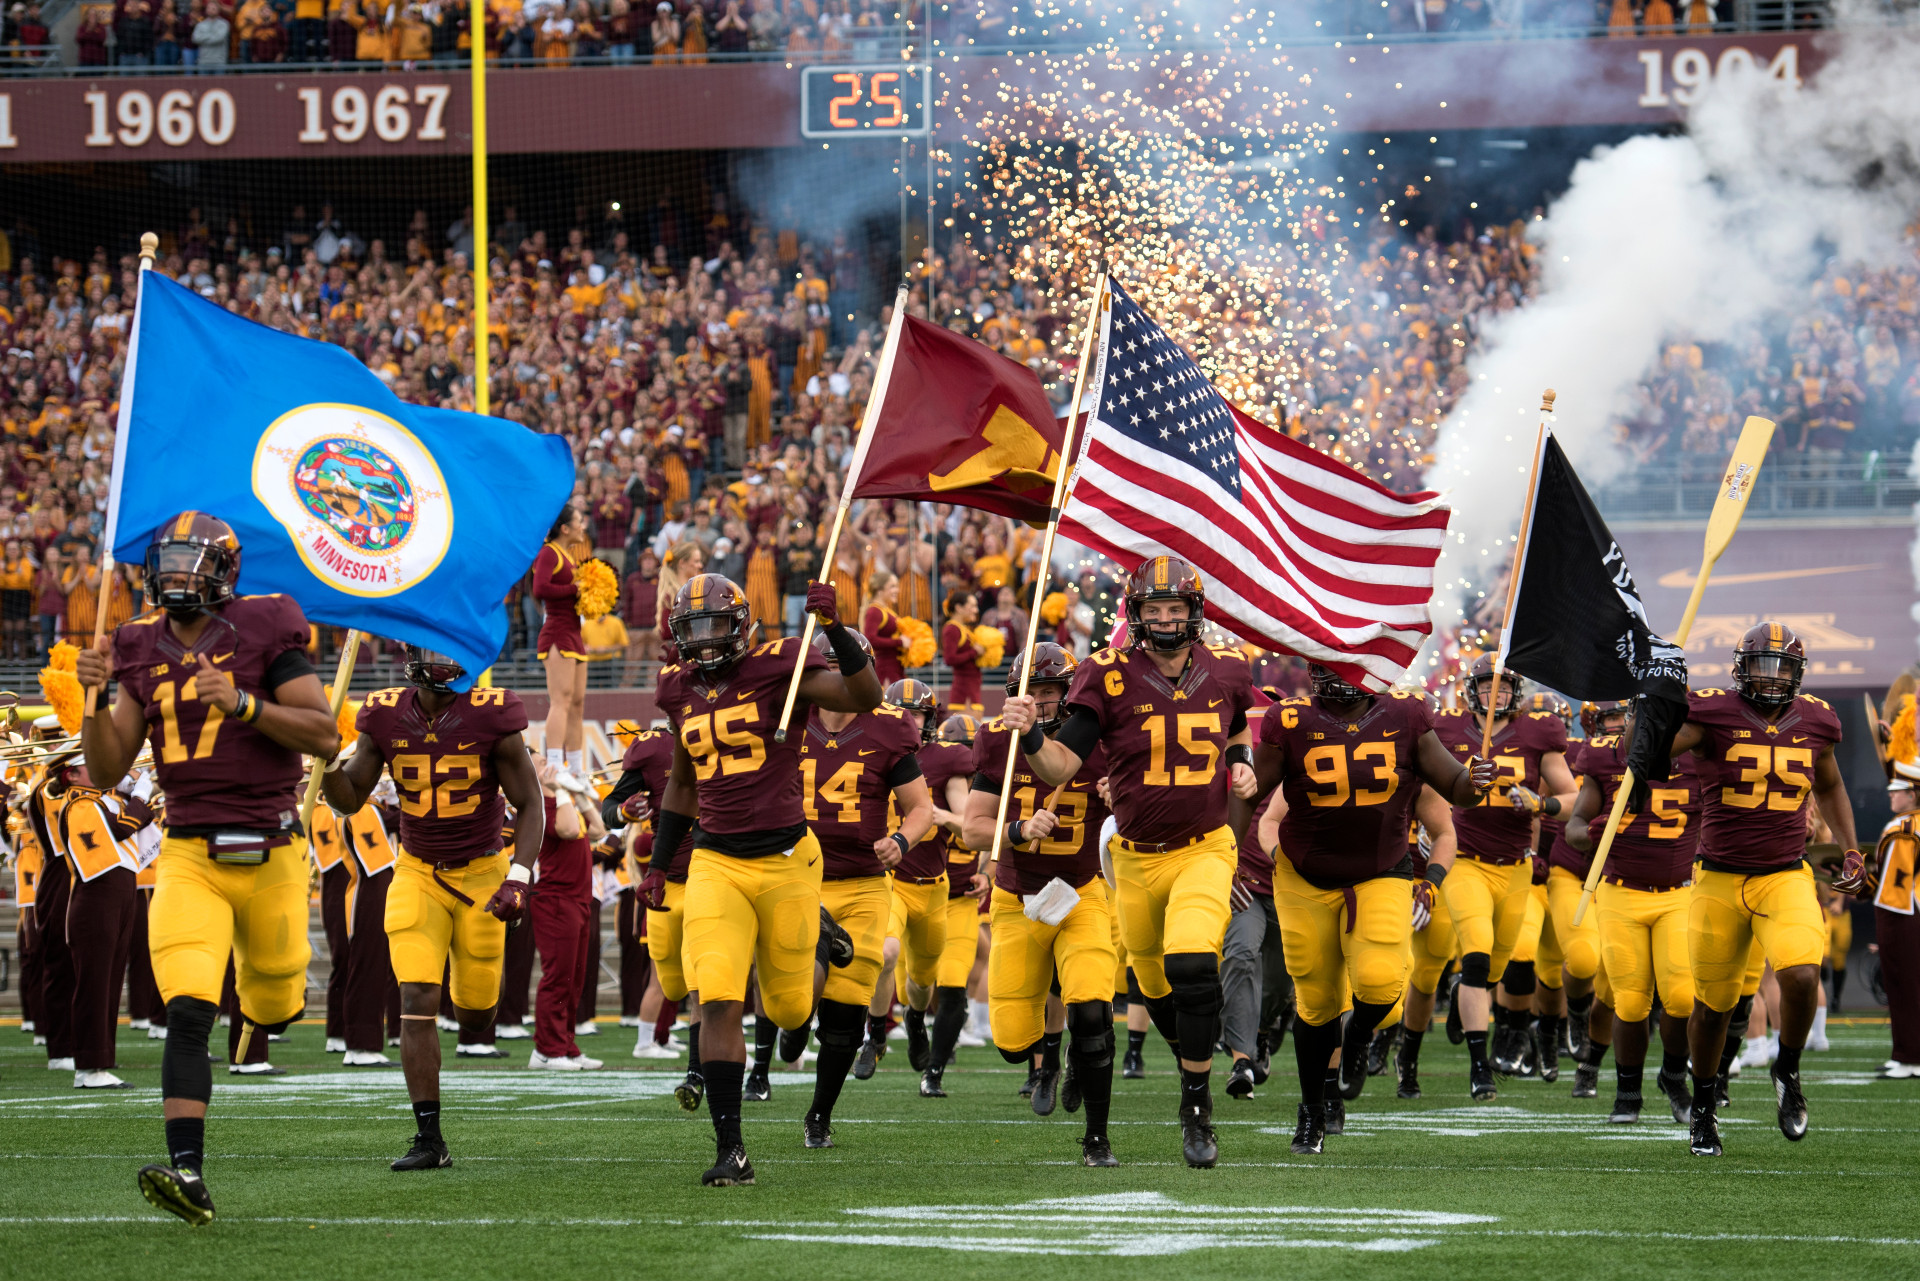 Gopher football players run onto the field on Gameday carrying the Minnesota and American flags